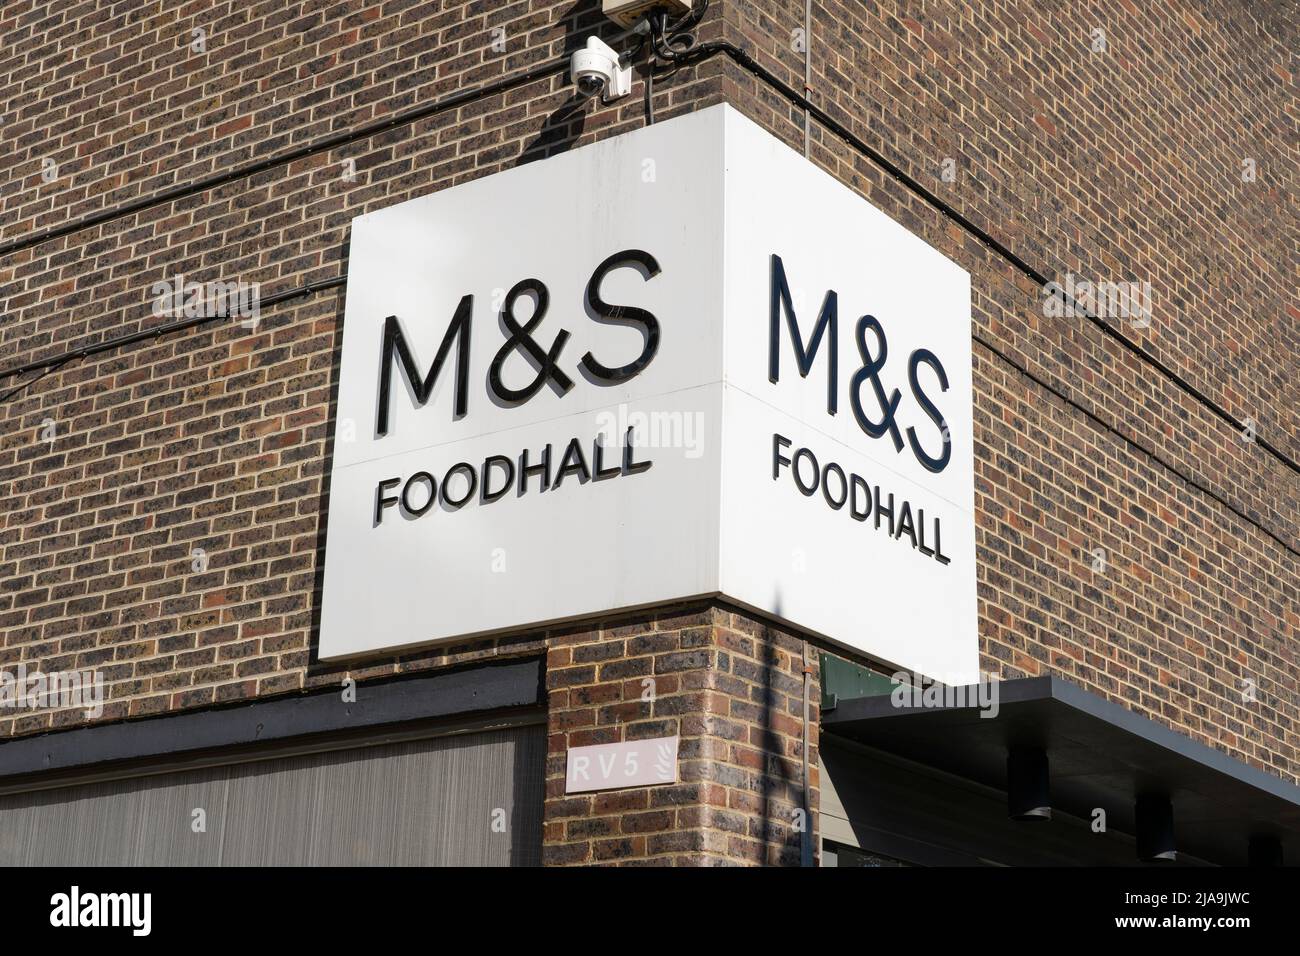 A sign on the outside of Marks and Spencer in Basingstoke town centre advertising an M&S Foodhall. England Stock Photo